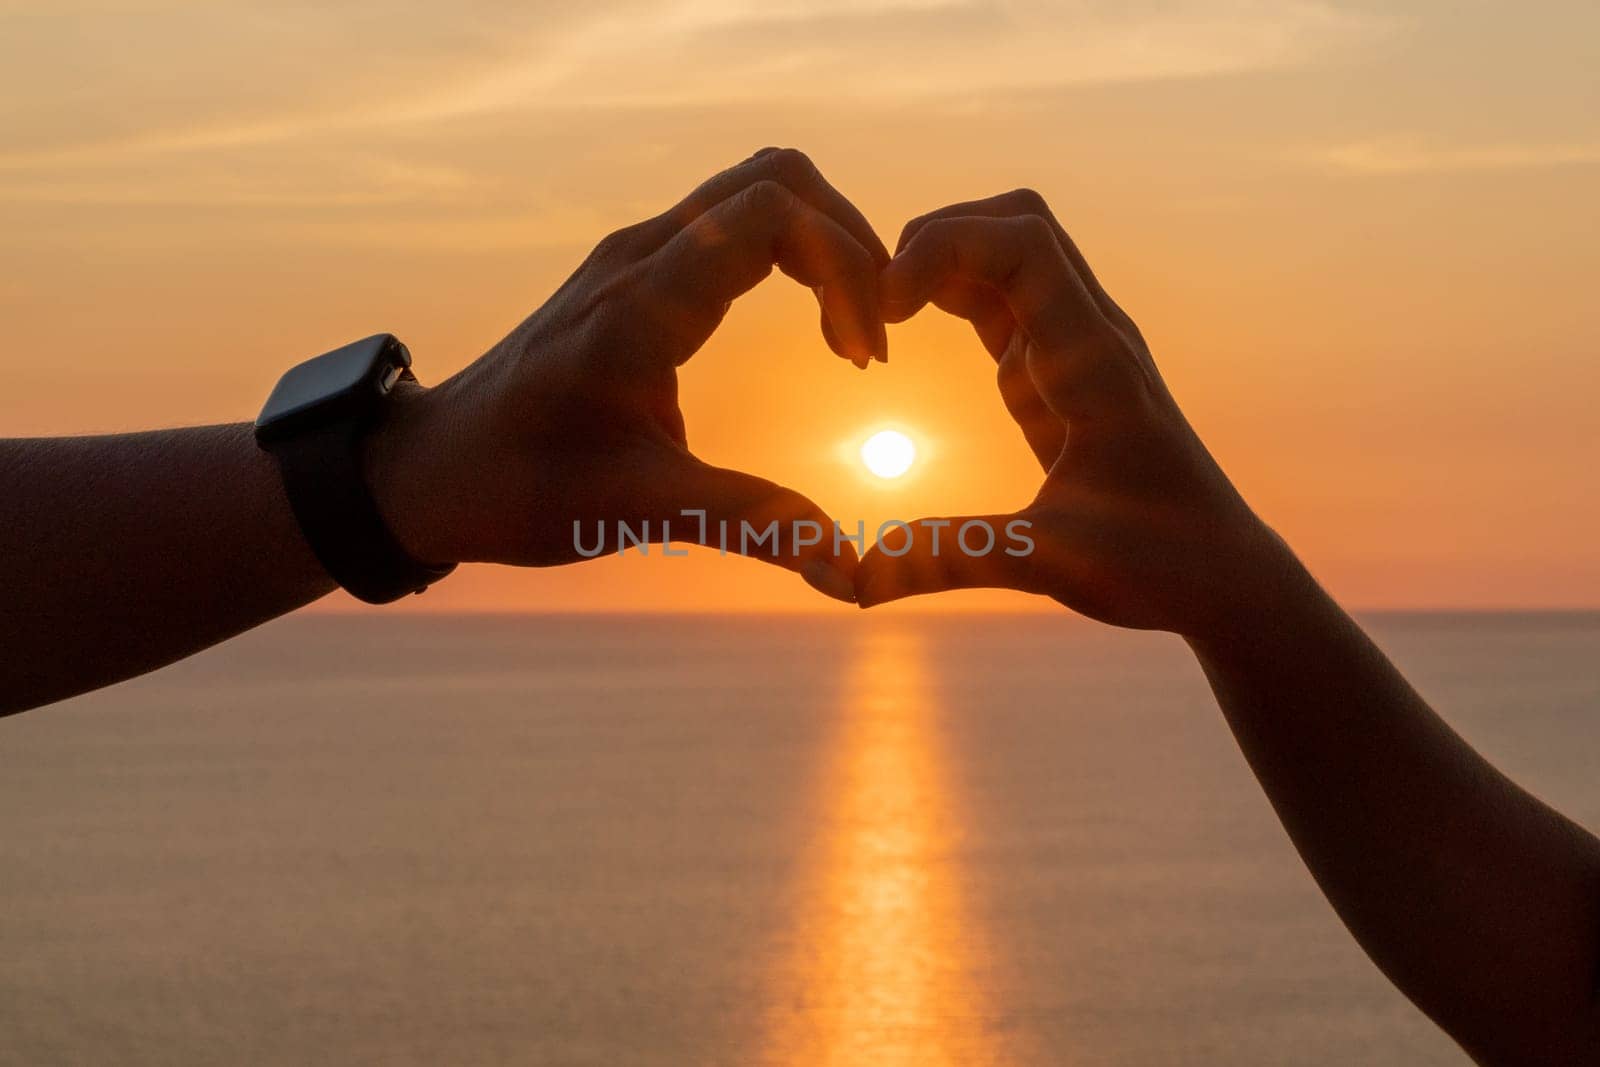 Hands heart sea sanset. The image features a beautiful sunset with two people holding their hands up in the air, forming a heart shape